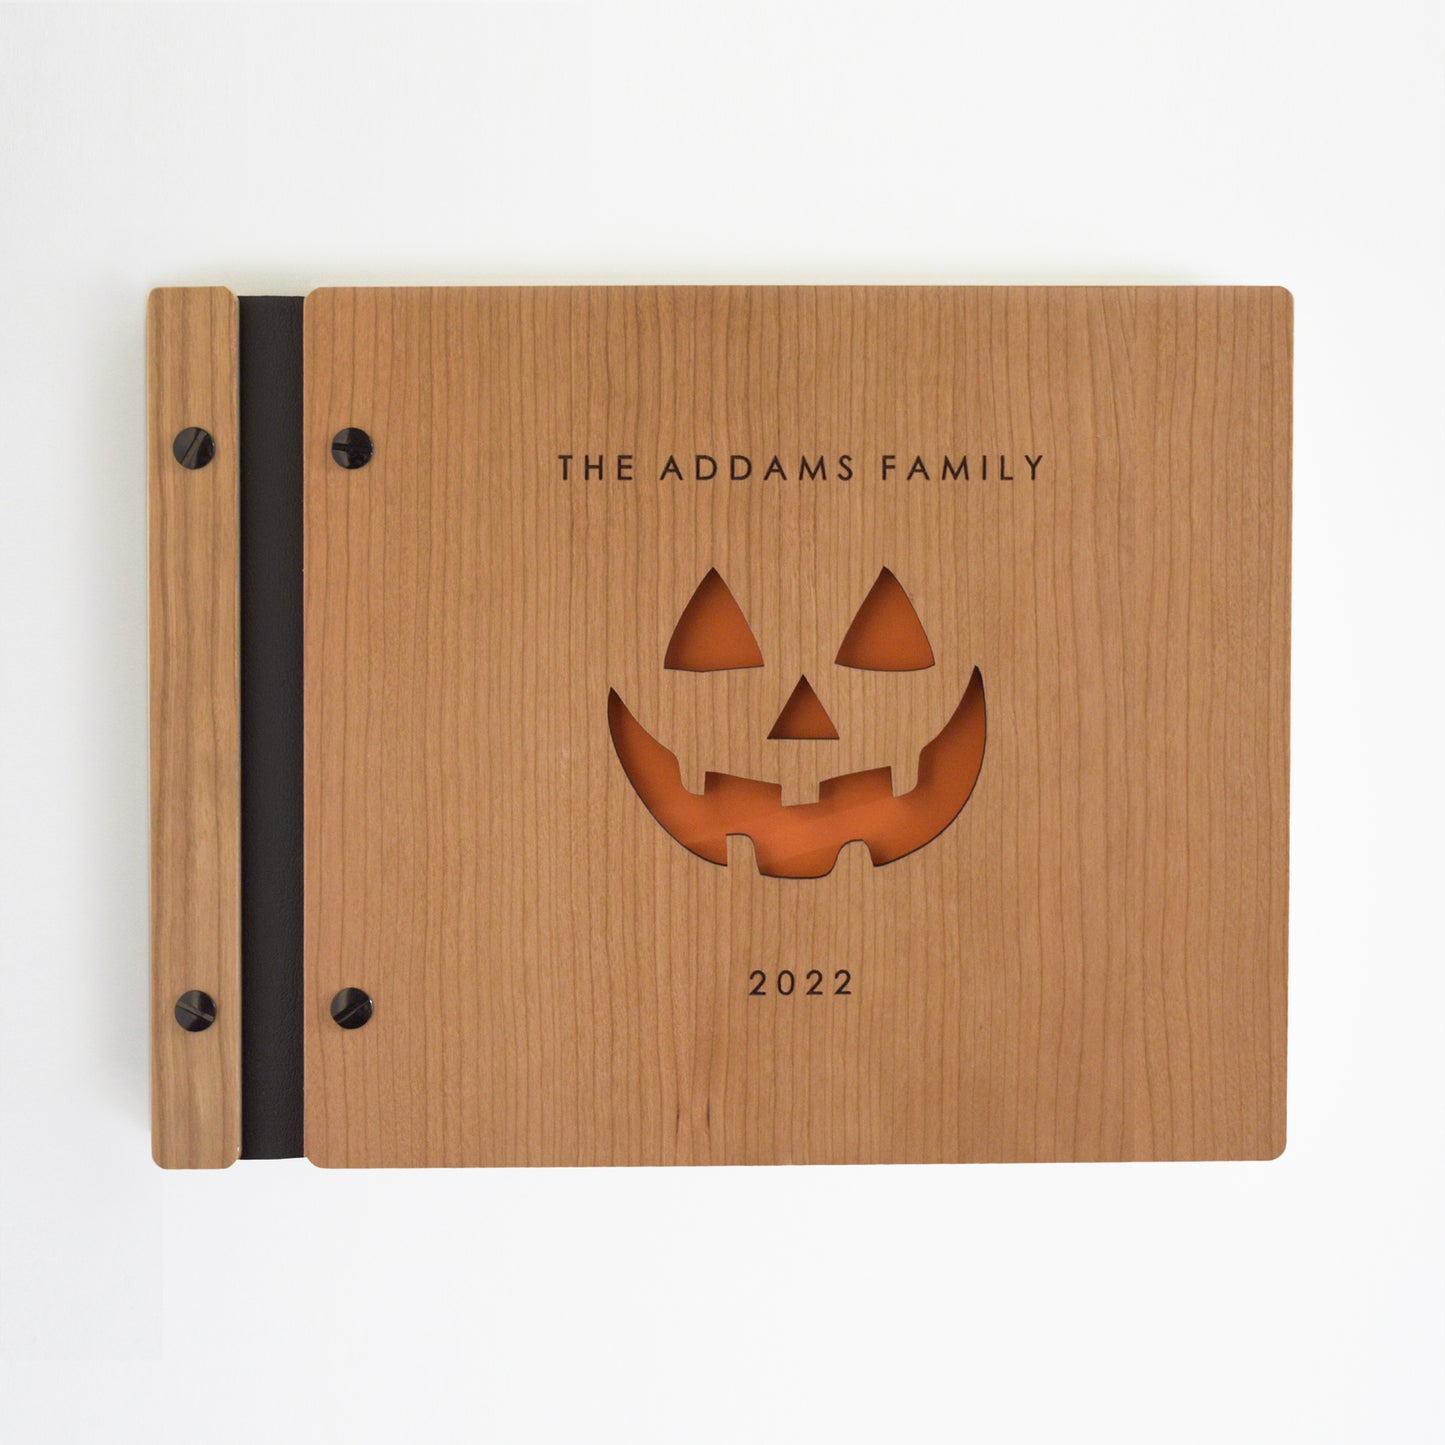 An 8.5x11" guest book lies on a table. Made of cherry wood, black vegan leather binding, and black hardware. The front cover reads The Addams Family, 2022 with an engraved pumpkin in the center.